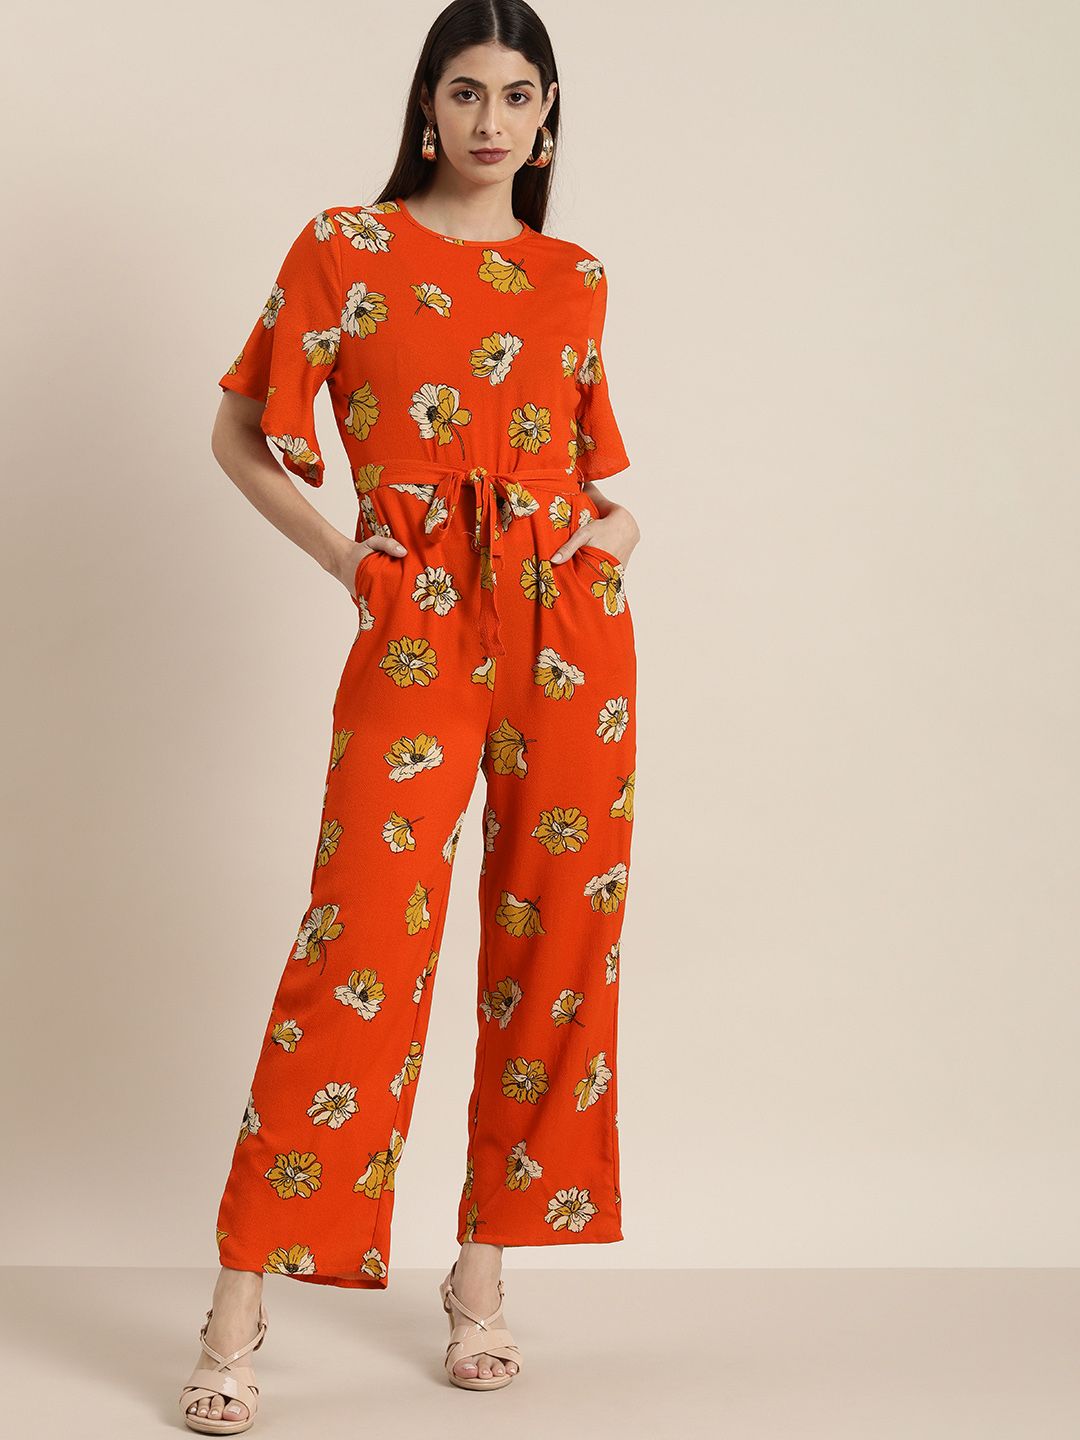 all about you Orange and Mustard Floral Printed Jumpsuit Price in India